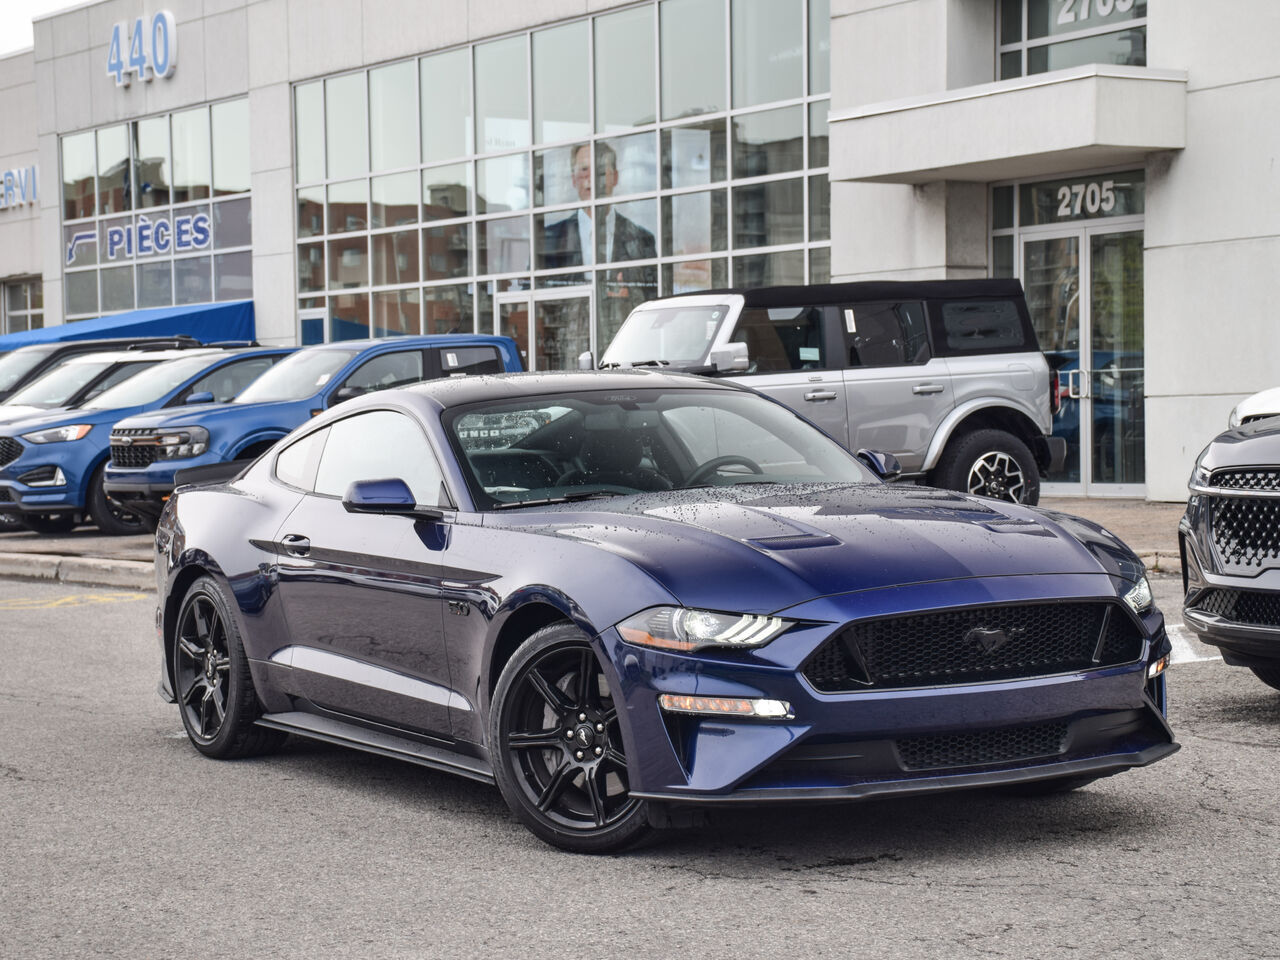 2019 Ford Mustang GT 300A 5.0L V8, AUTO, SEULEMENT 6,900KM!